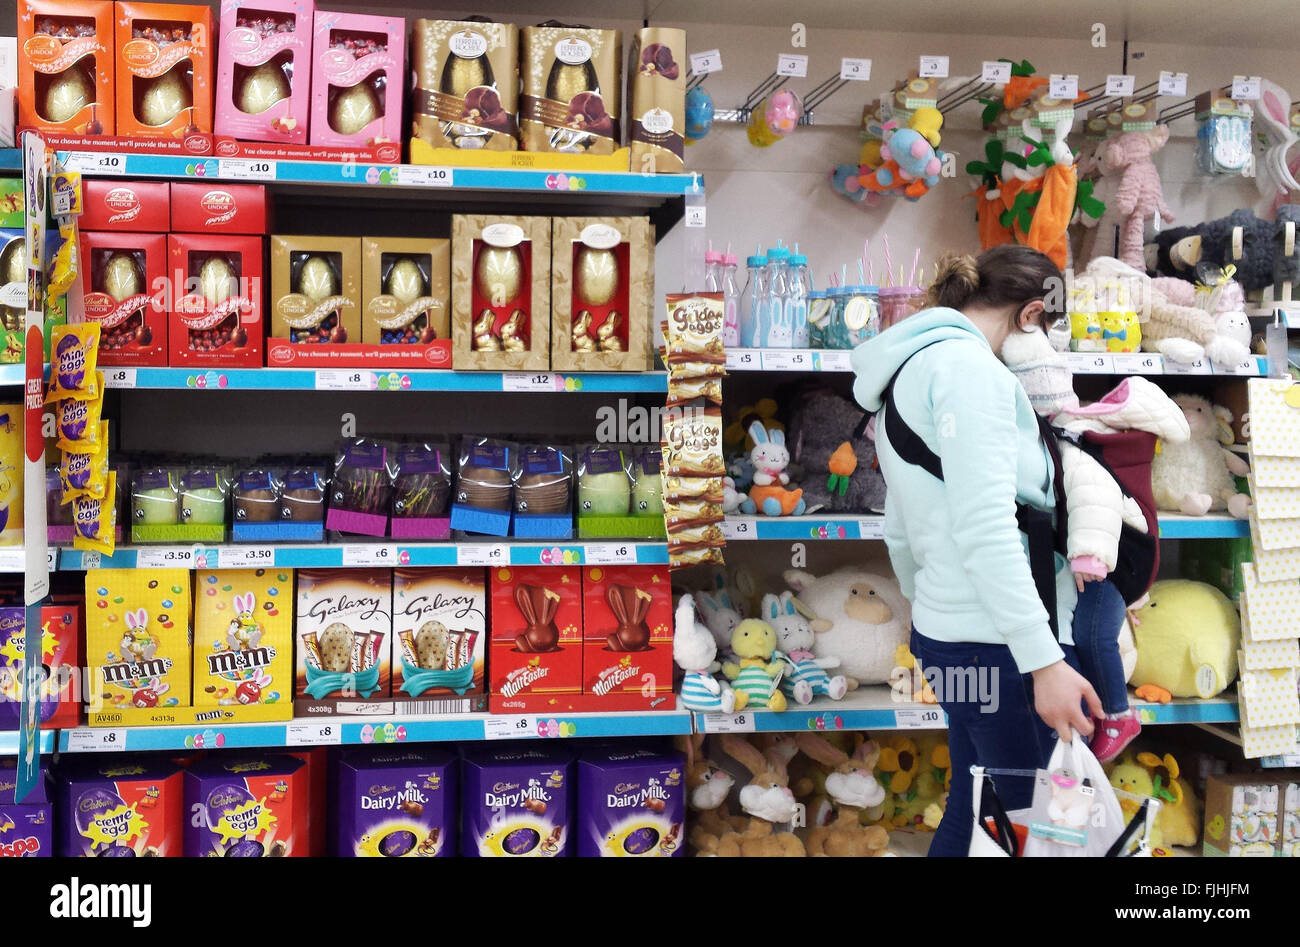 London, UK 2 March 2016 - A shopper in Sainsburys store looks at the Easter goods display. Sainsbuys store in Harringey, North London start Easter Eggs displays three weeks early. Good Friday is on Friday, 25 March 2016 and Easter Sunday on Sunday, 27 March 2016 © Dinendra Haria/Alamy Live News Stock Photo